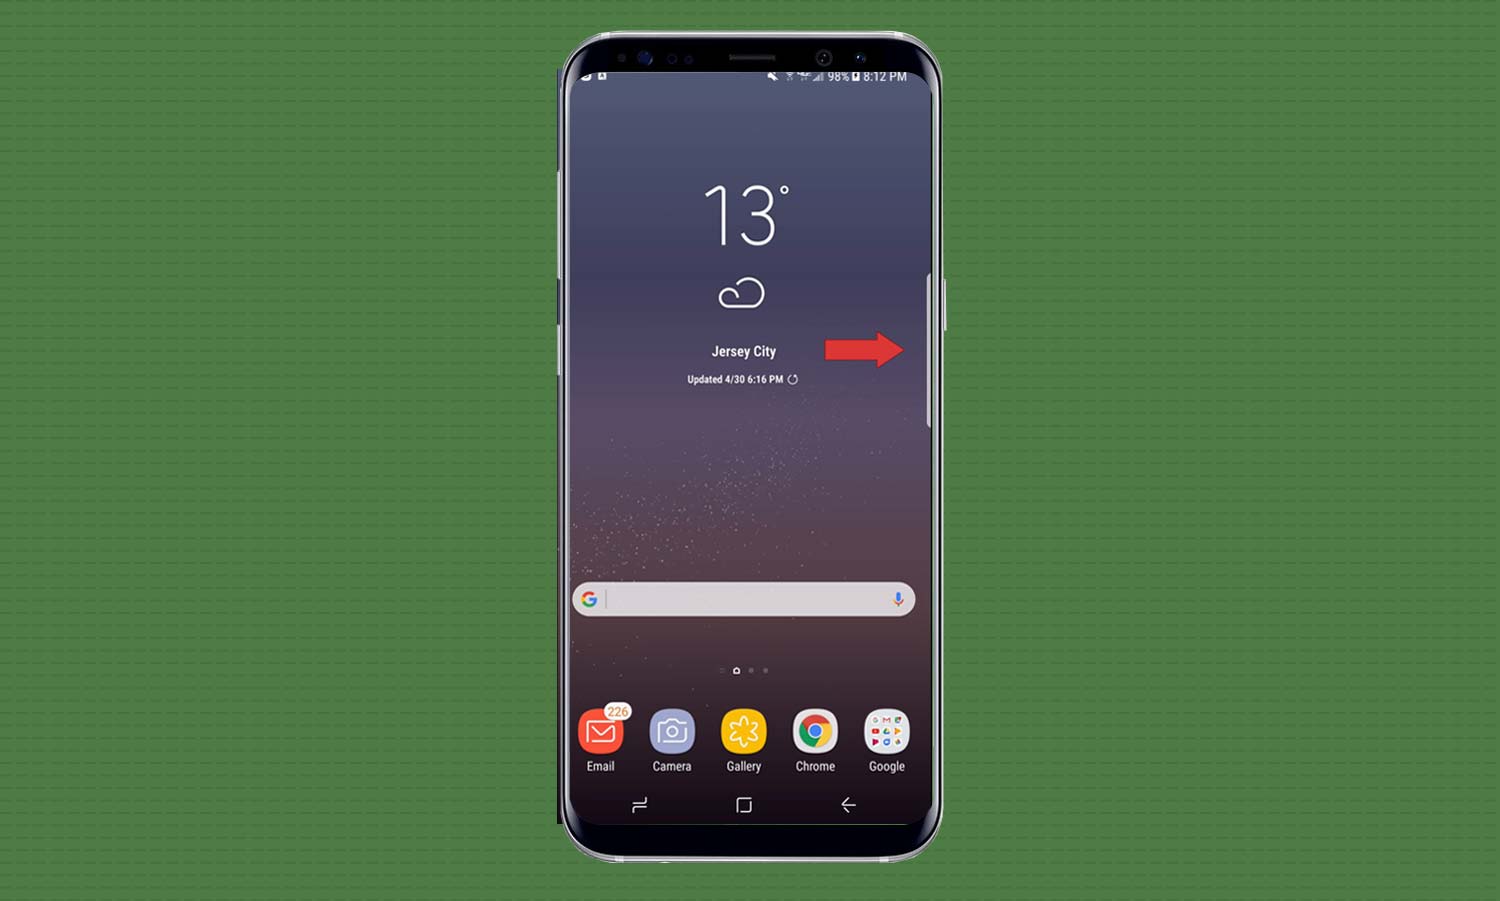 How to Take a Screenshot with the Galaxy S8 - Samsung Galaxy S8 User